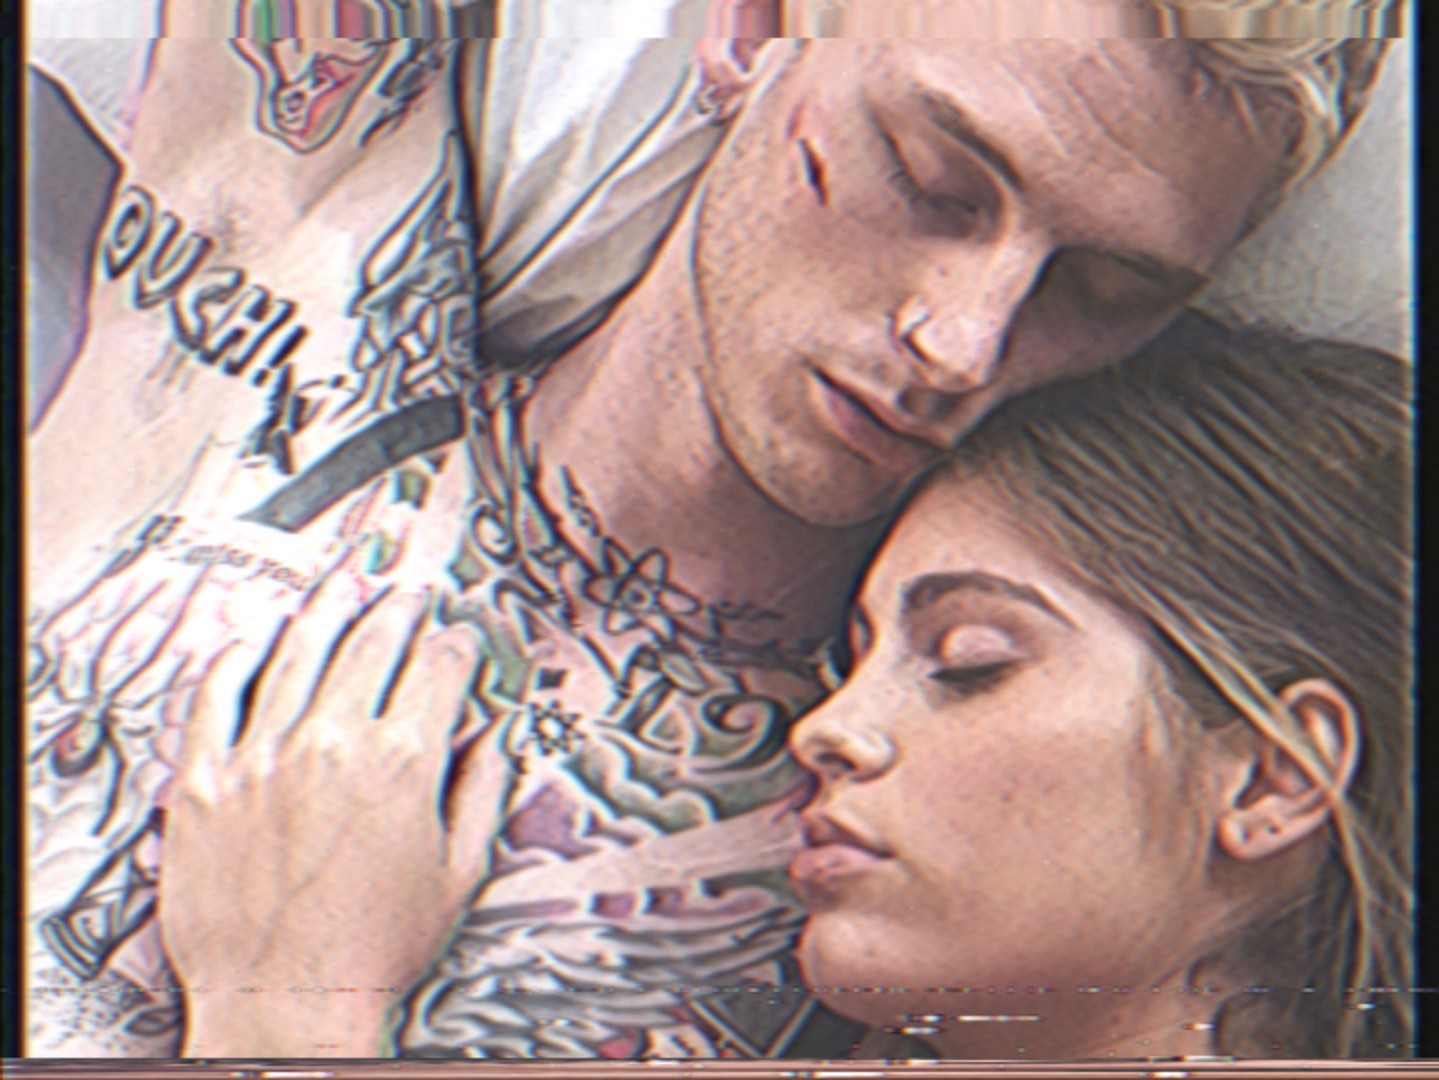 Machine gun kelly opened up about the connection between his drug abuse and...